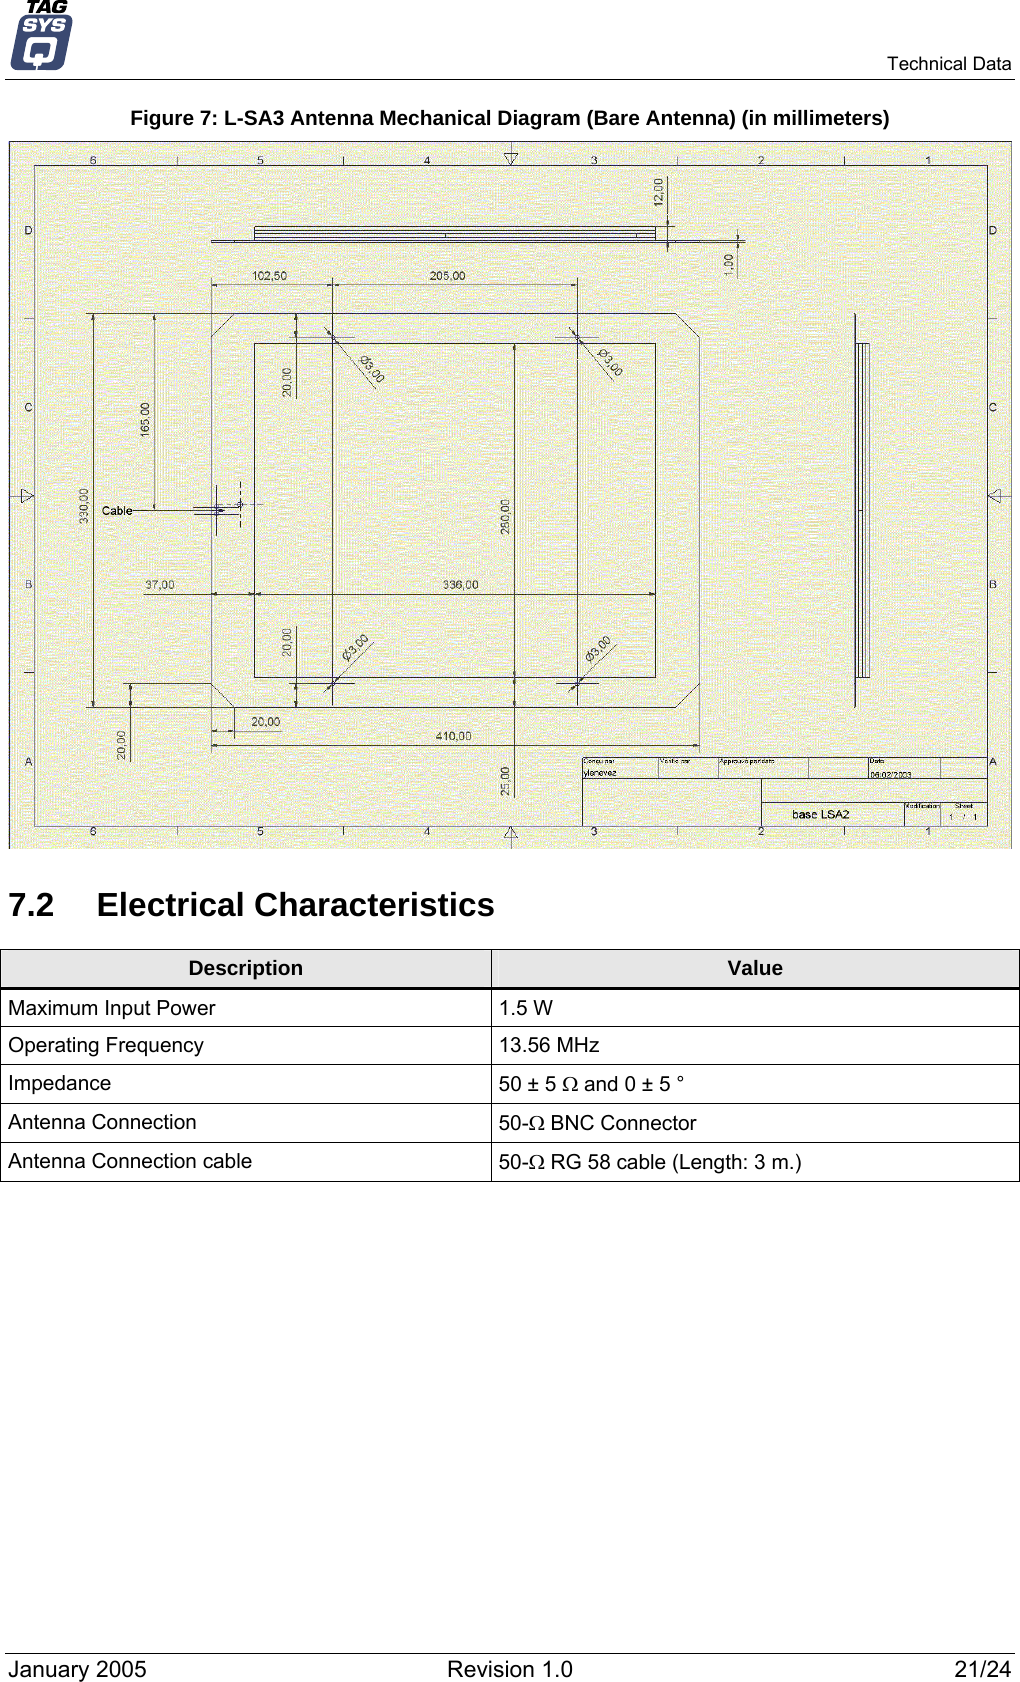   Technical Data Figure 7: L-SA3 Antenna Mechanical Diagram (Bare Antenna) (in millimeters)  7.2 Electrical Characteristics Description  Value Maximum Input Power  1.5 W  Operating Frequency  13.56 MHz Impedance  50 ± 5 Ω and 0 ± 5 °  Antenna Connection  50-Ω BNC Connector Antenna Connection cable  50-Ω RG 58 cable (Length: 3 m.)  January 2005  Revision 1.0  21/24 